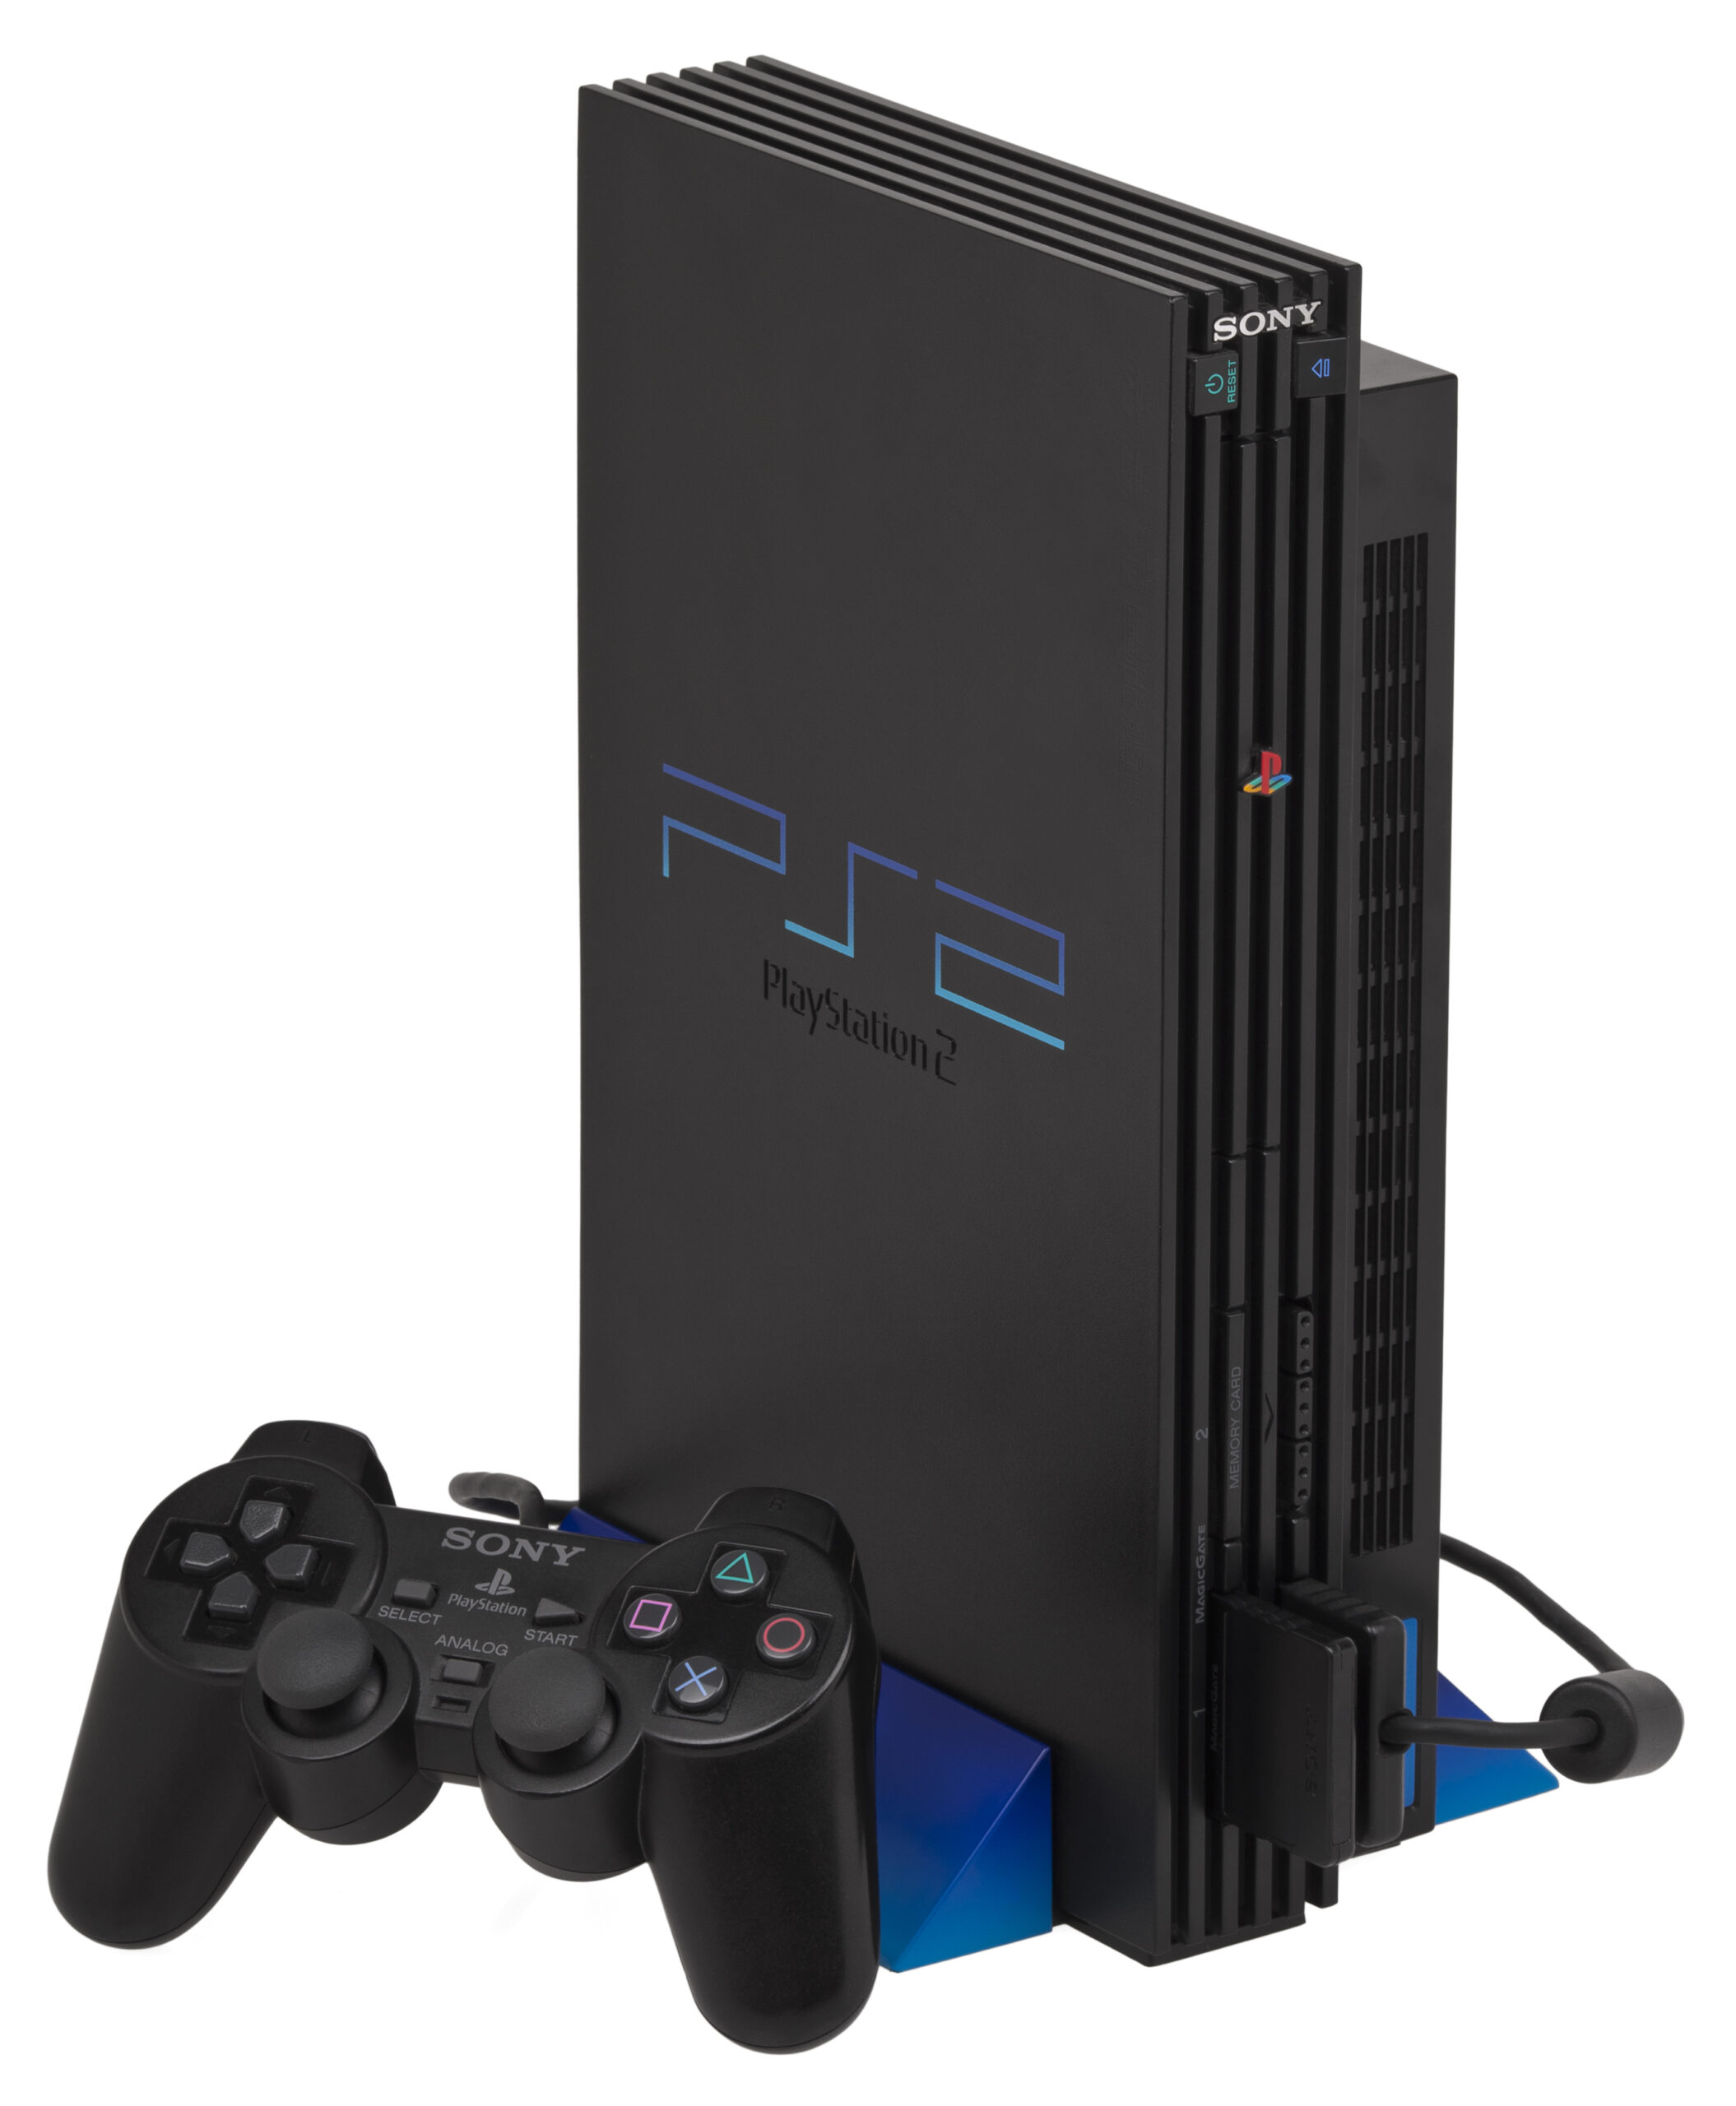 REMEMBER THIS: PS2 20 Year Anniversary